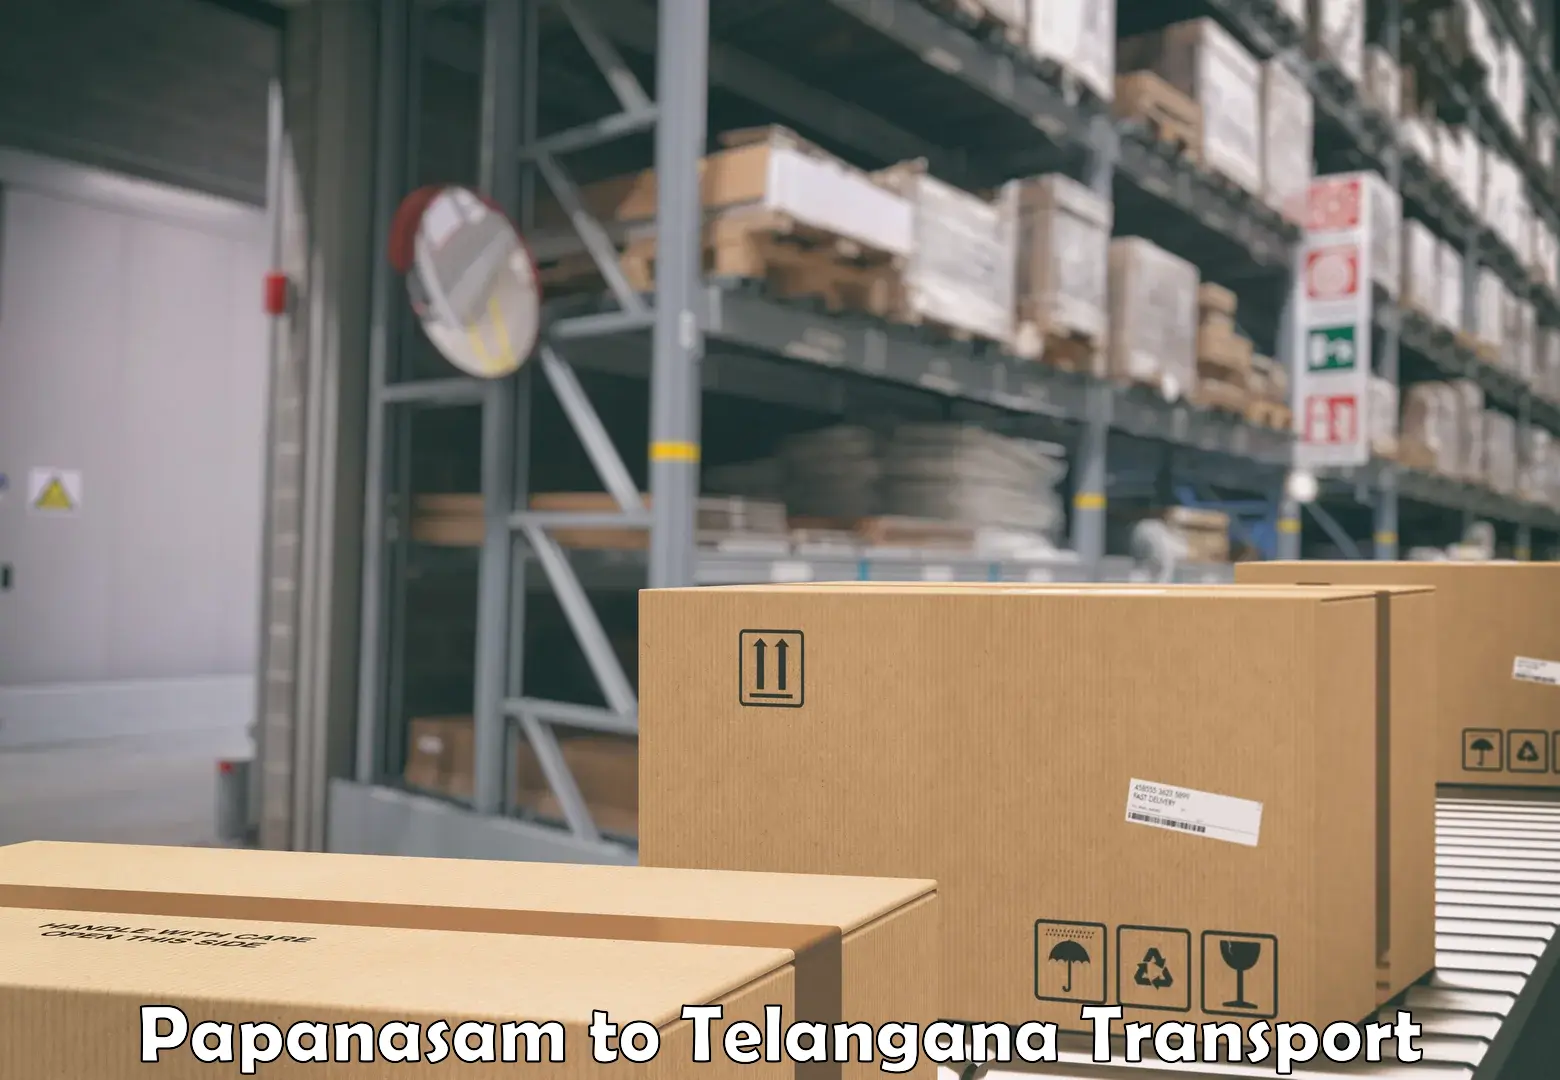 Air freight transport services in Papanasam to Cherla